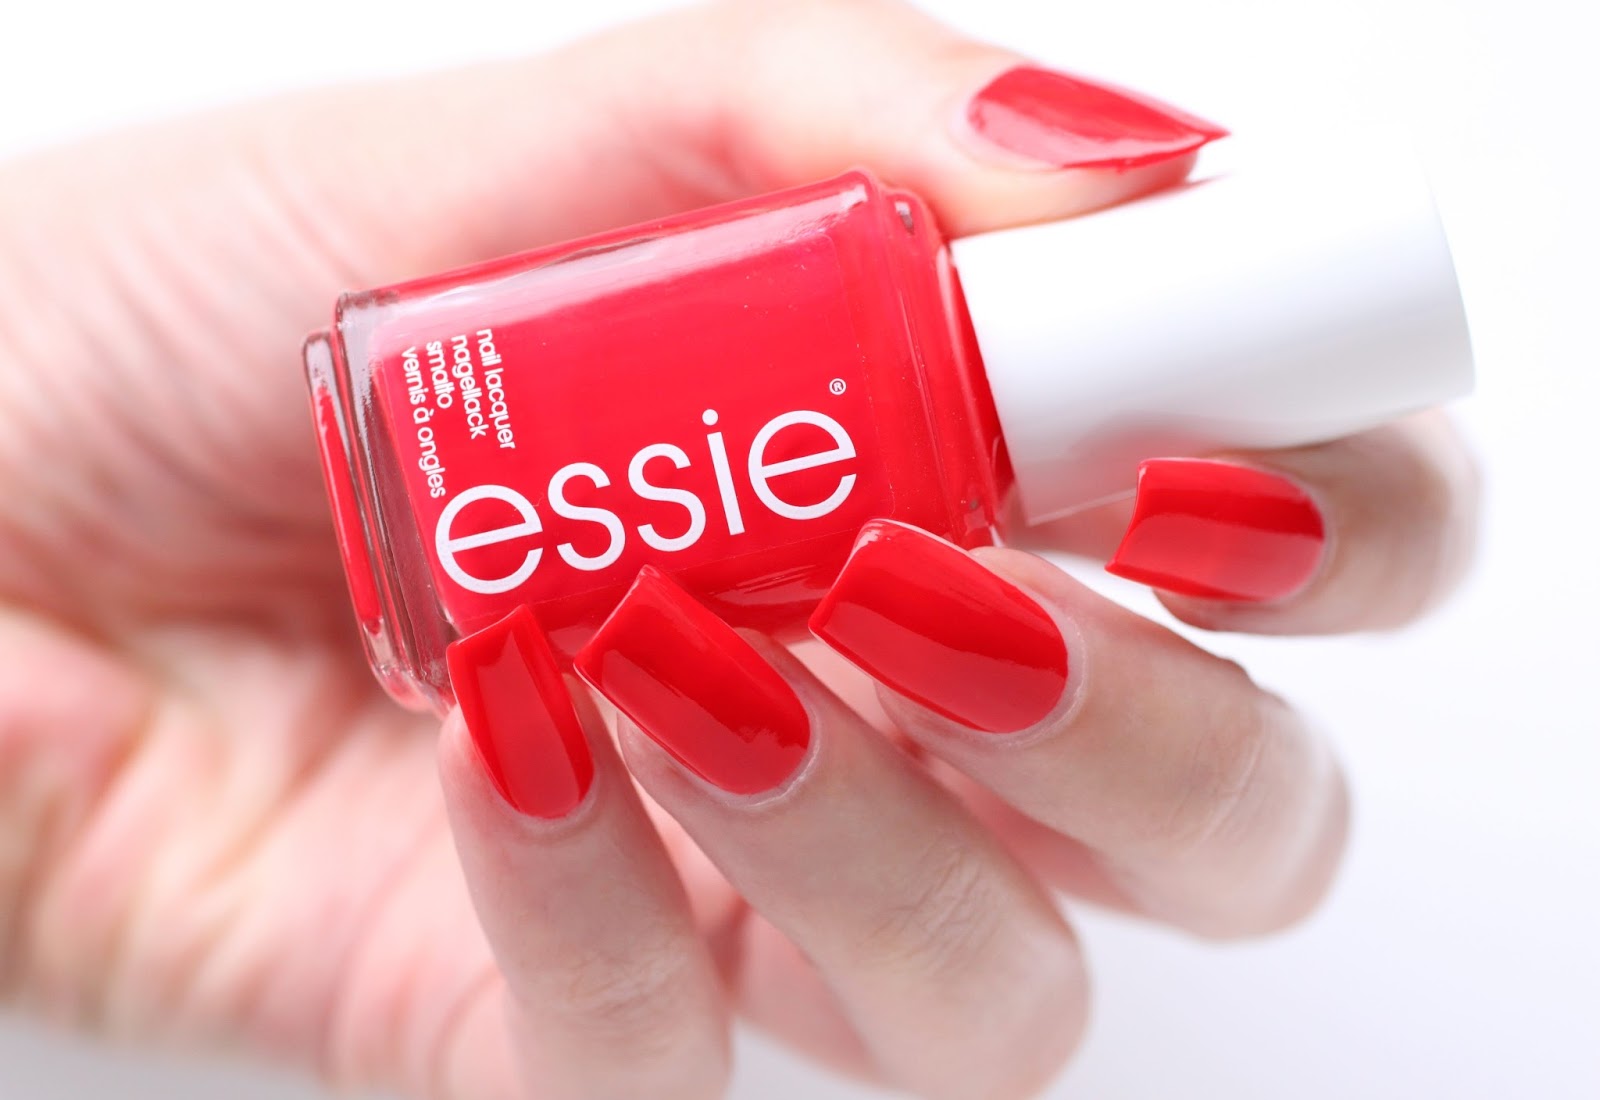 Essie Nail Polish - Best New Colors - wide 8